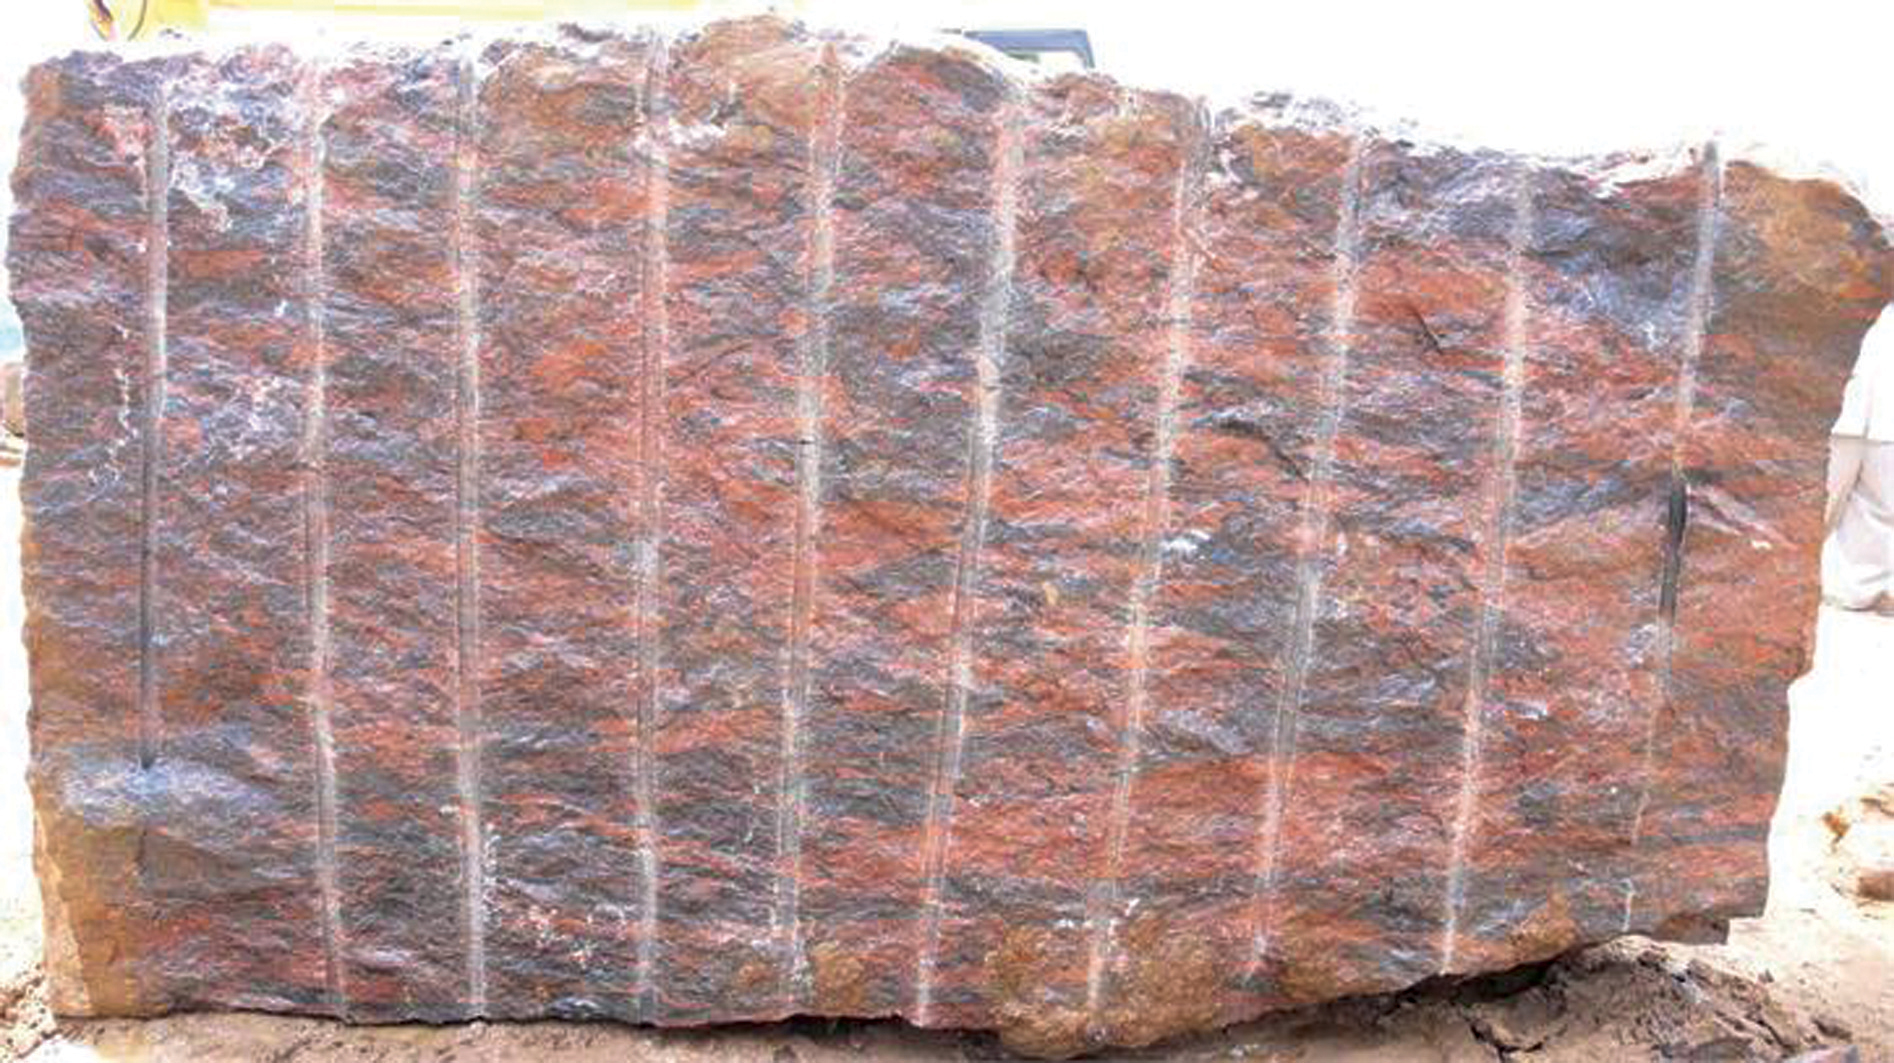 Rare Indian red granite from quarries in southern India